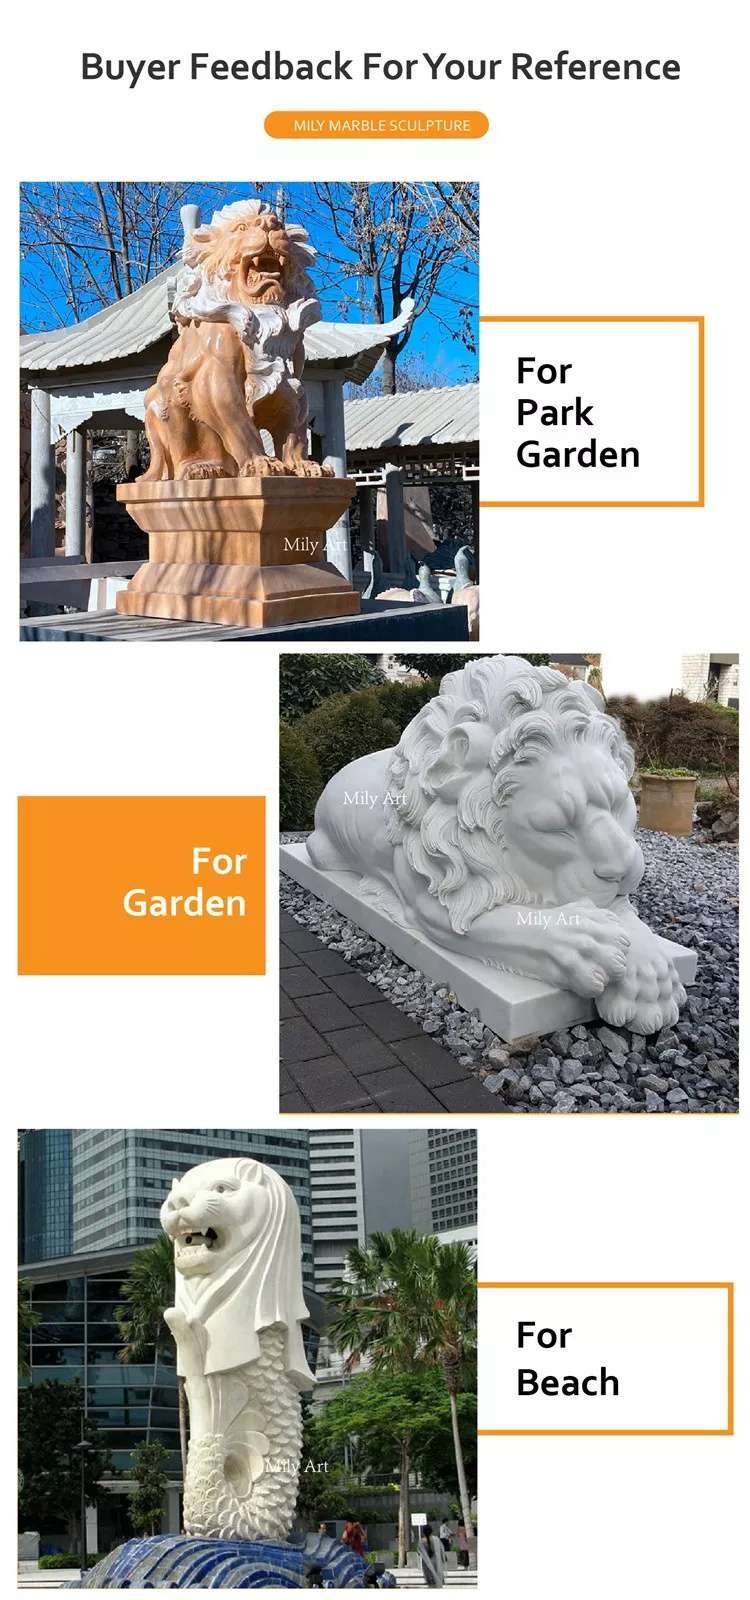 4.1.feedback of lion statue home decor mily sculpture